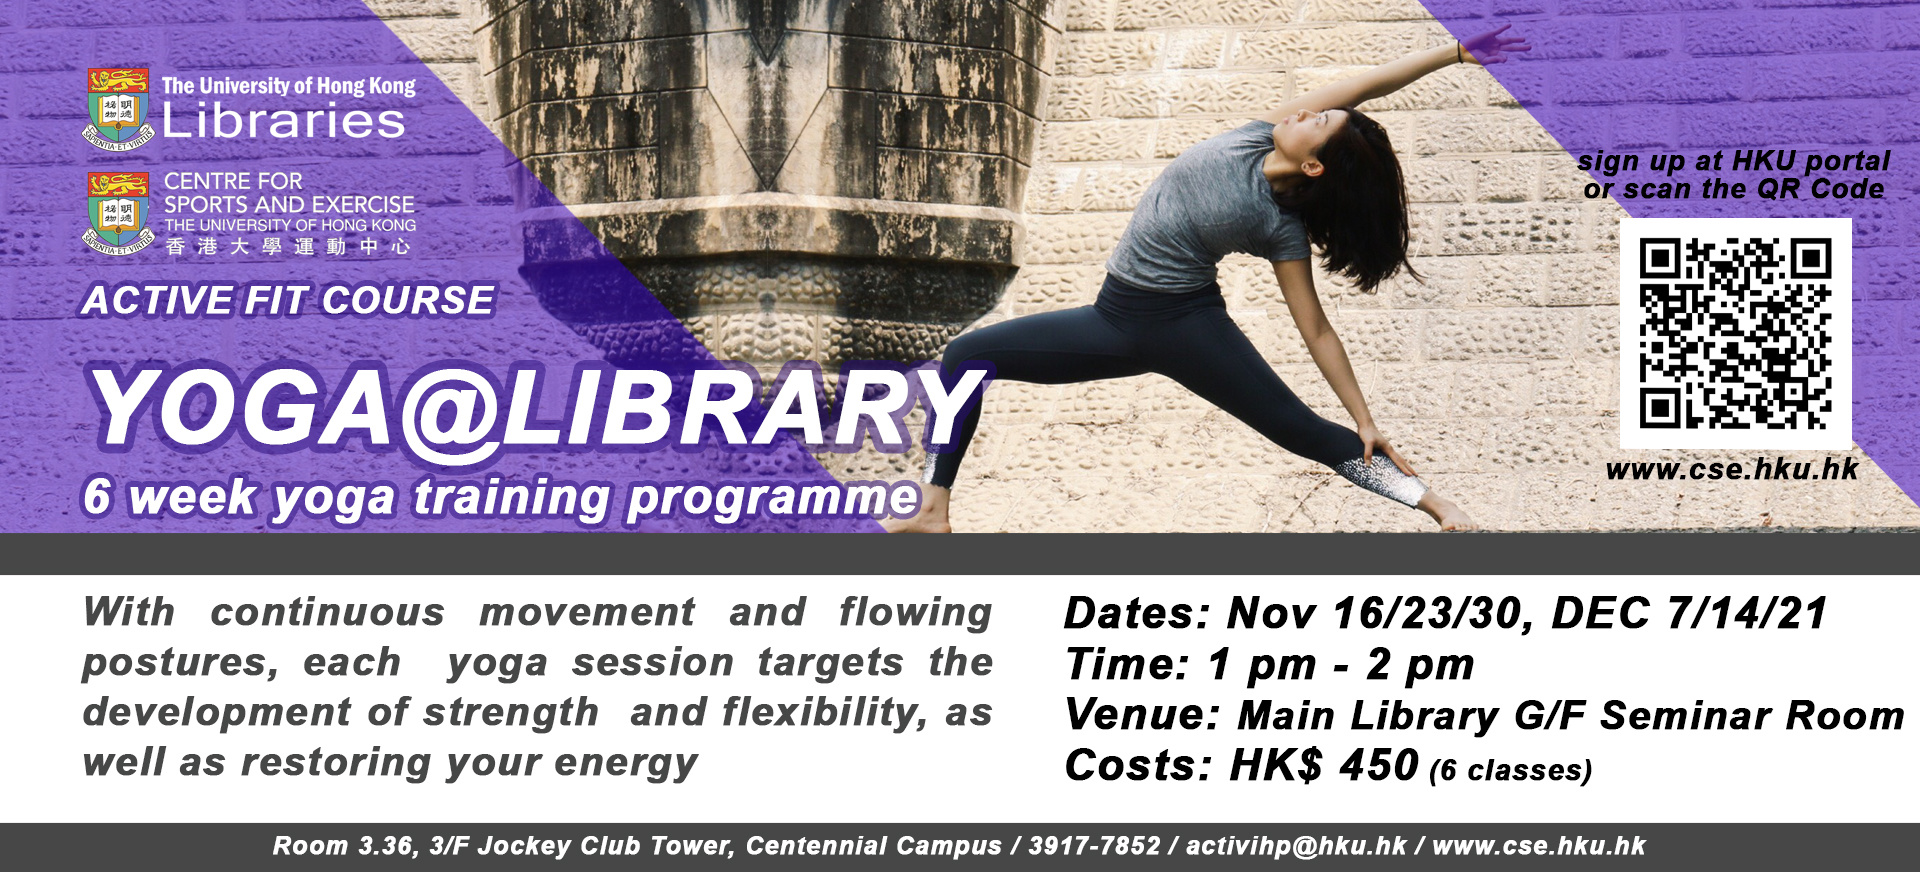 Active Fit Course - Yoga @ Library